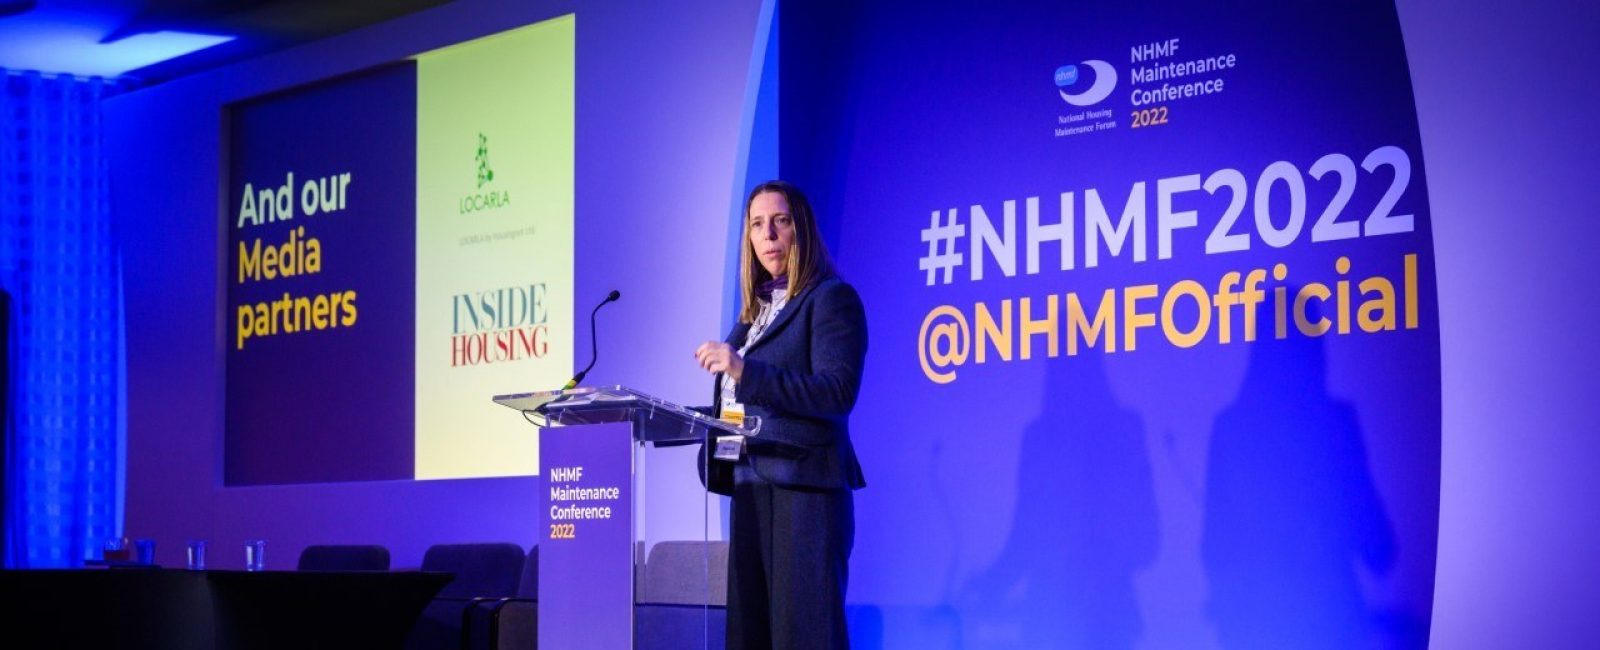 NHMF conference